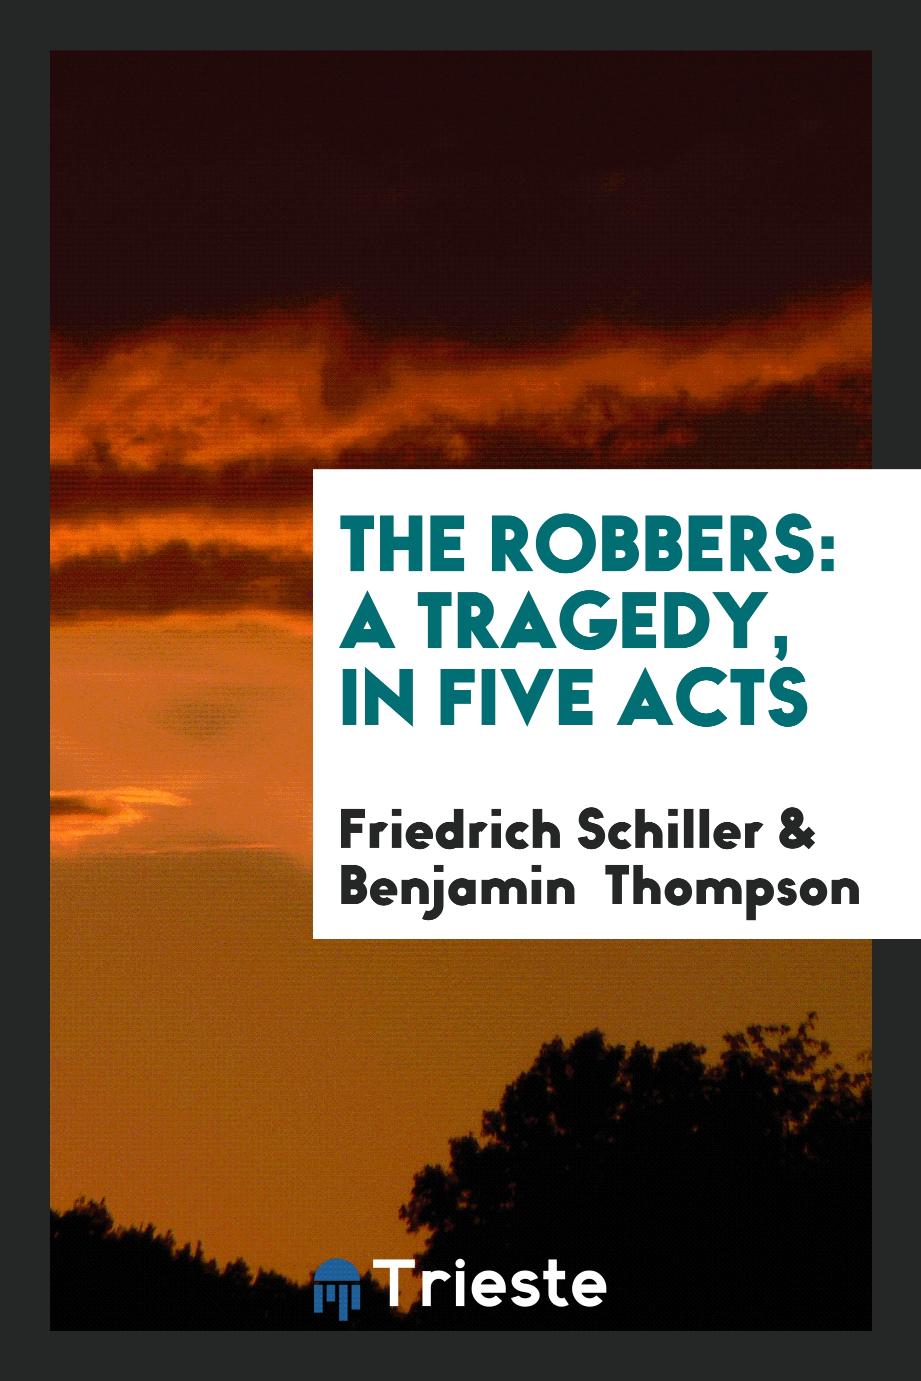 The Robbers: A Tragedy, in Five Acts